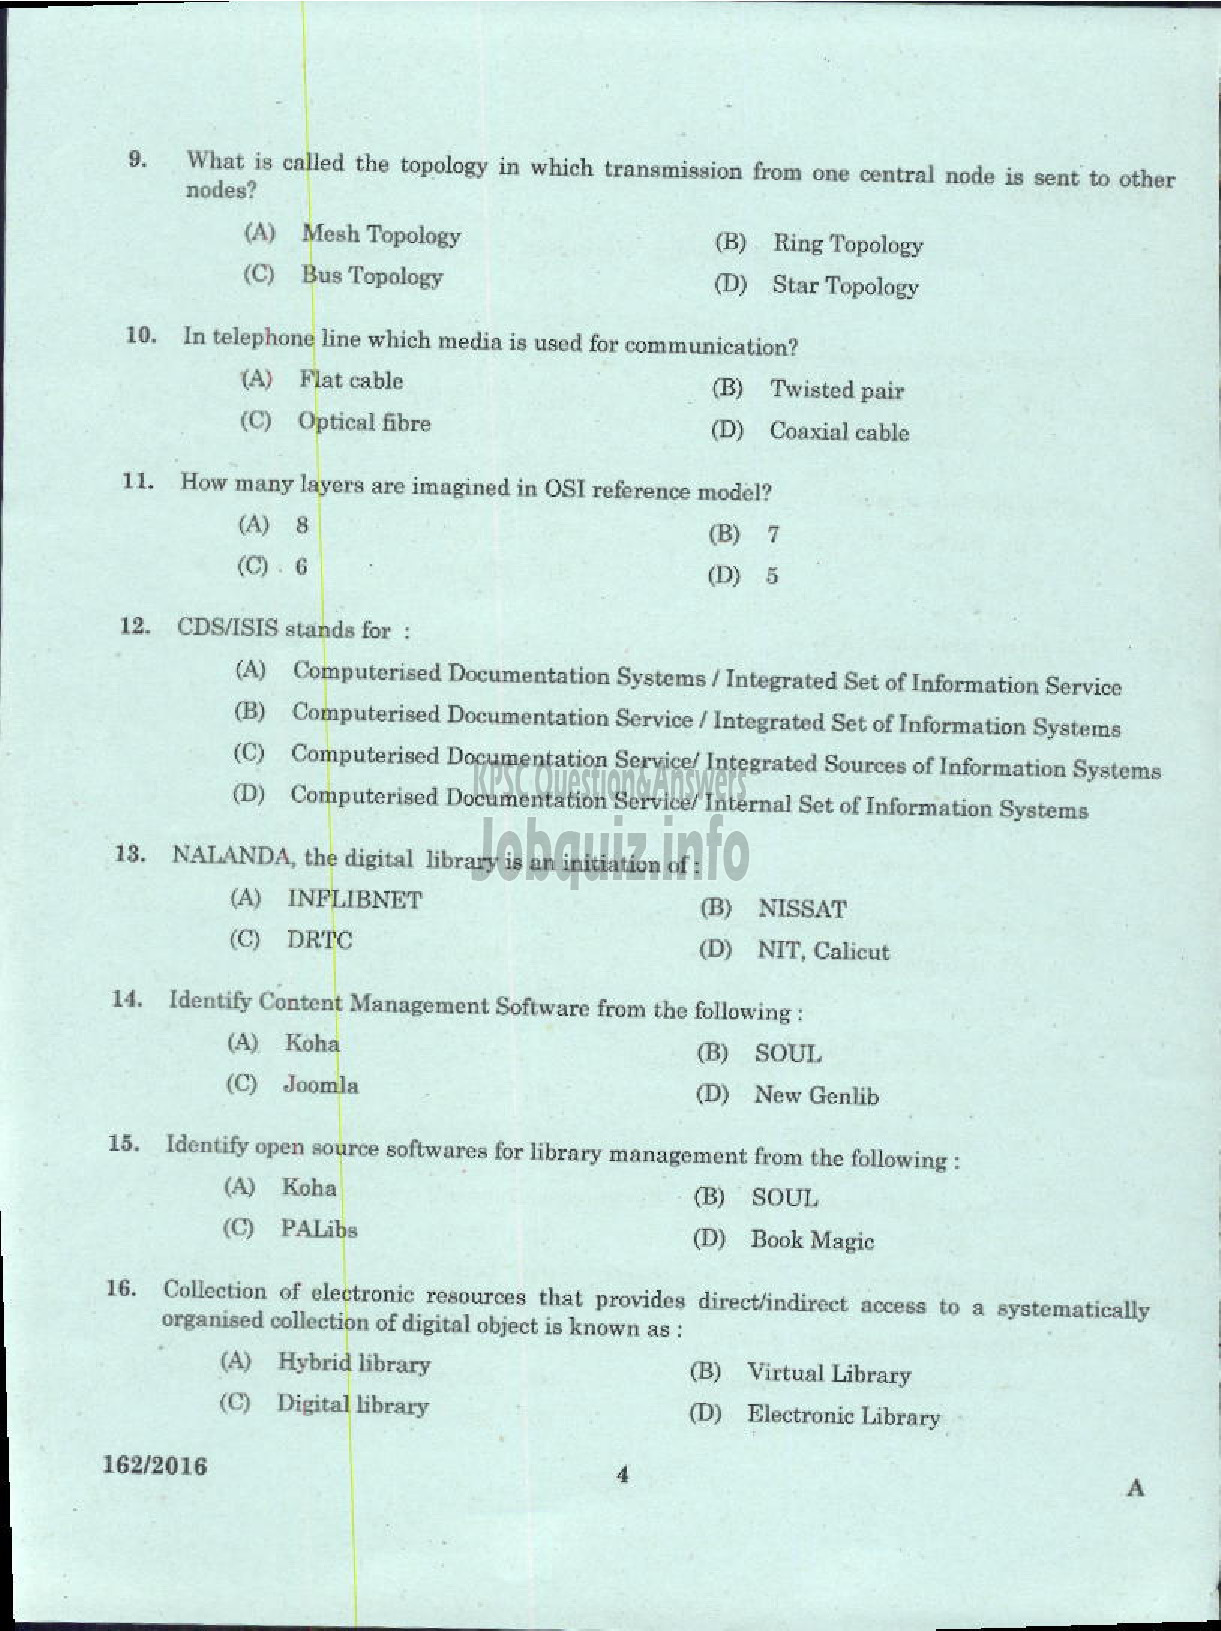 Kerala PSC Question Paper - LIBRARIAN GR IV KERALA COMMON POOL LIBRARY-2